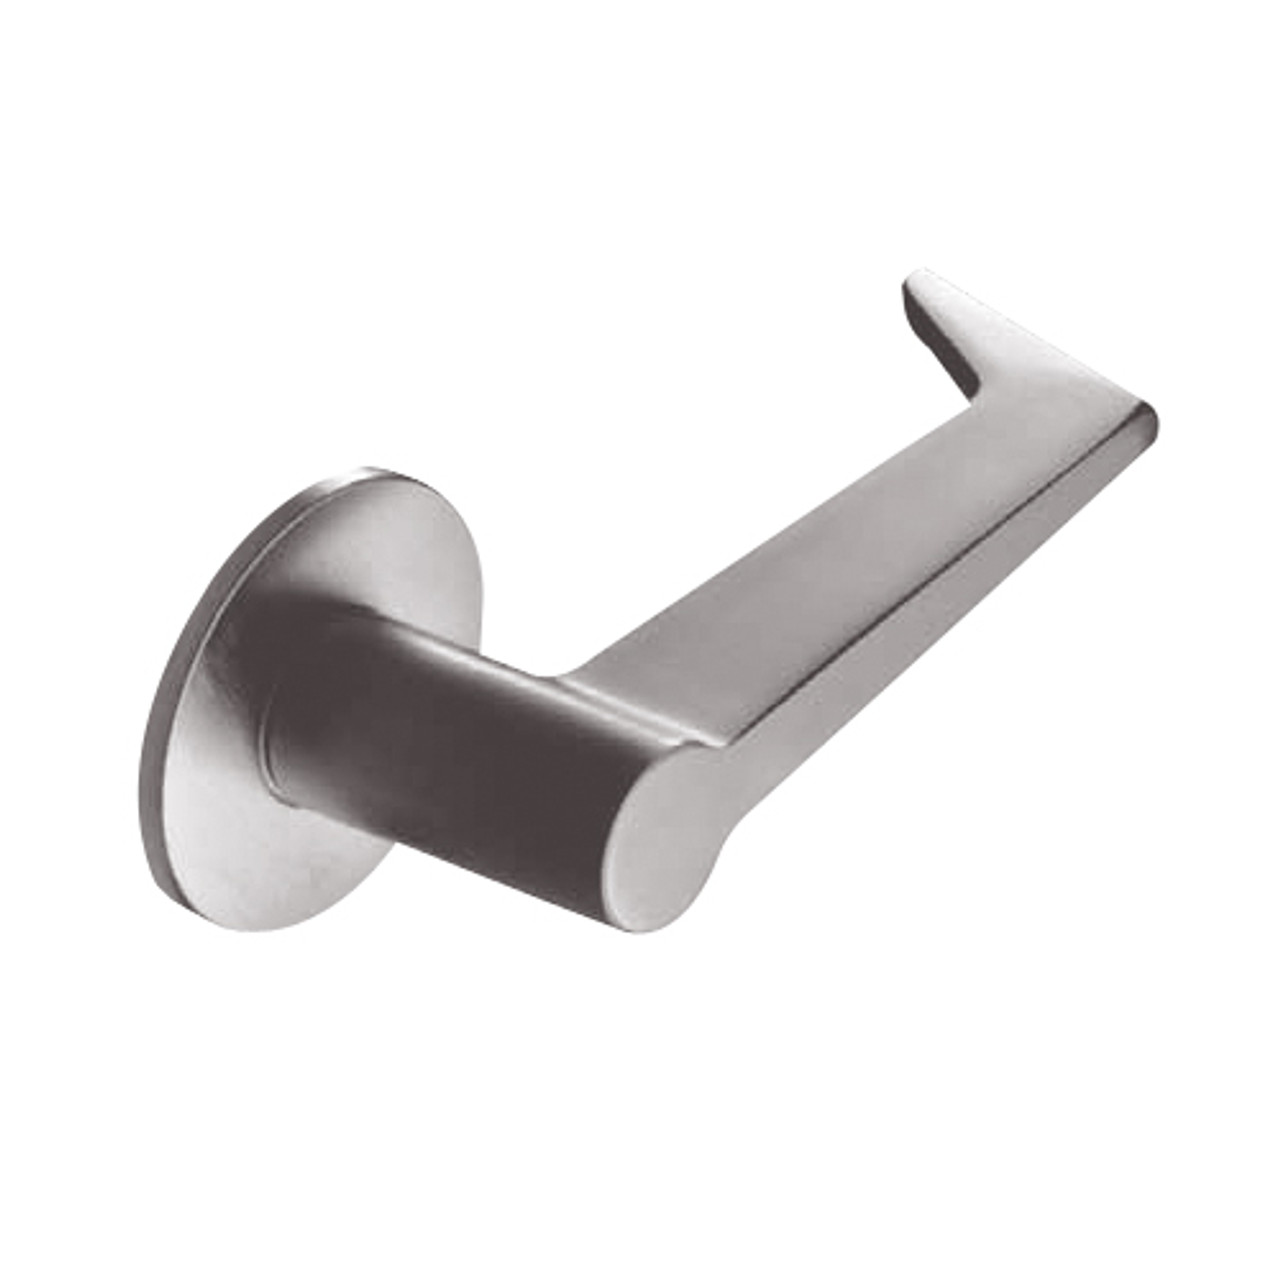 ML2056-ESF-629 Corbin Russwin ML2000 Series Mortise Classroom Locksets with Essex Lever in Bright Stainless Steel